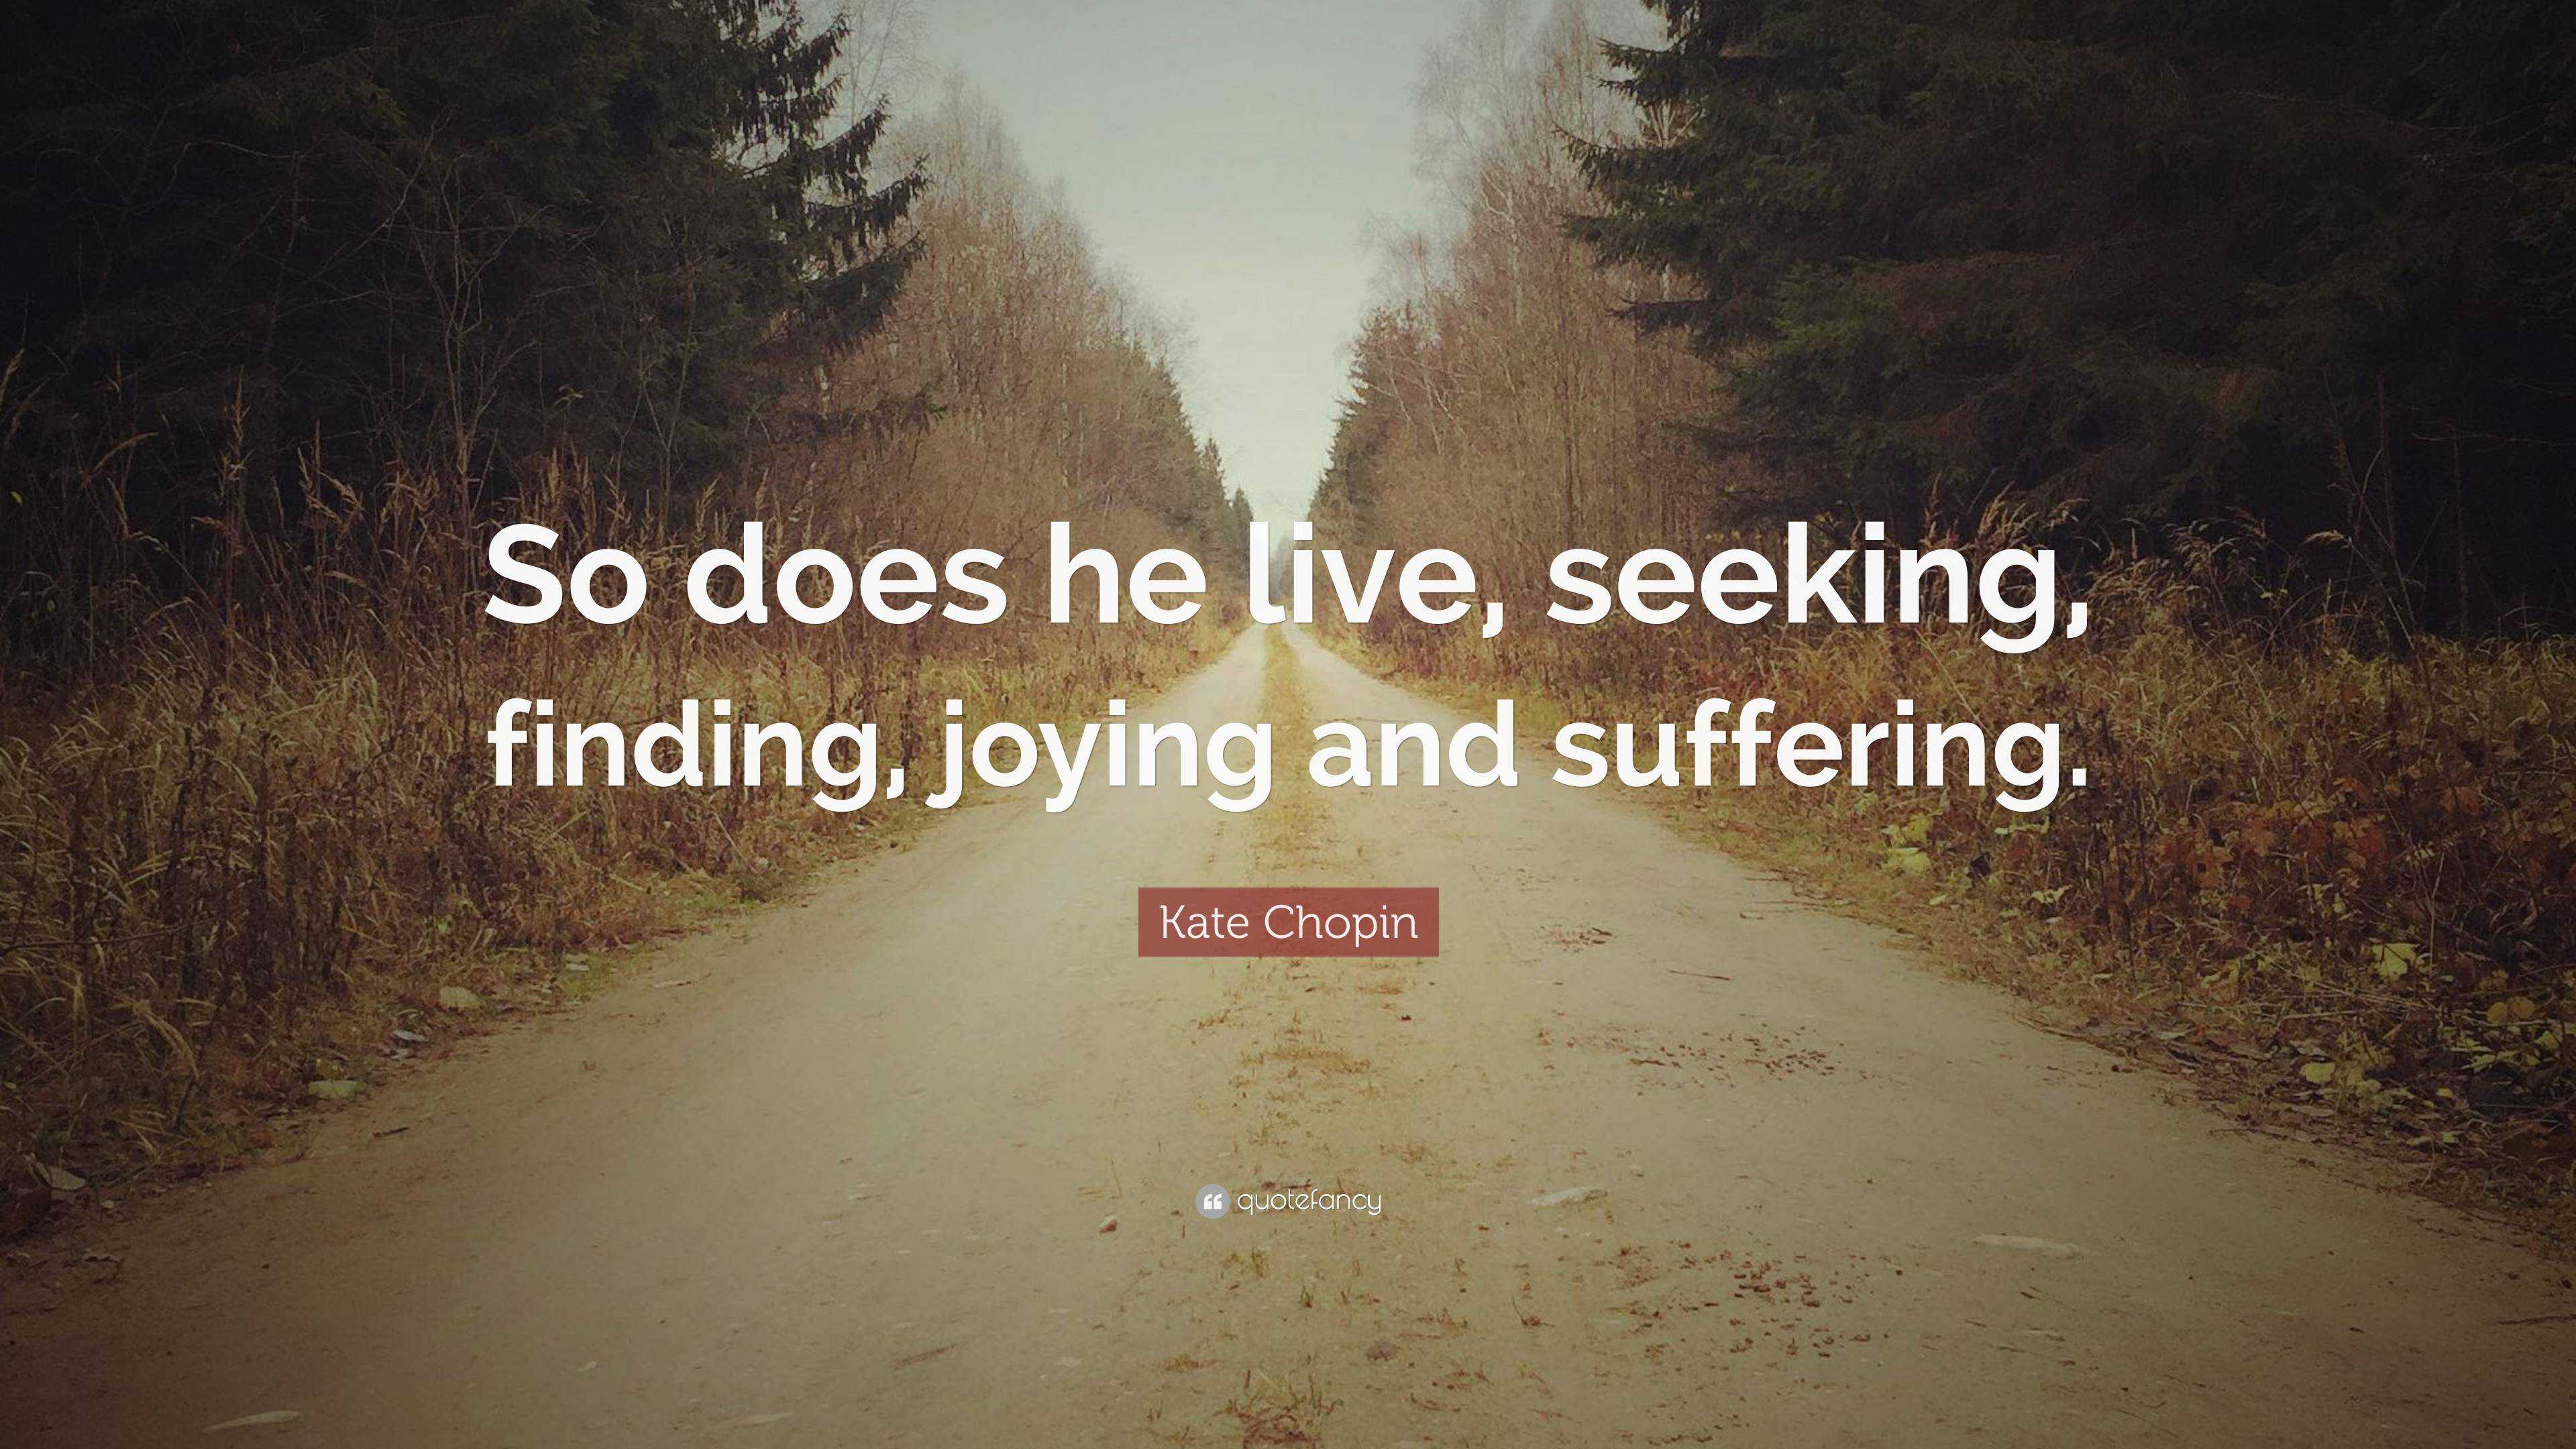 Kate Chopin Quote “So does he live, seeking, finding, joying and